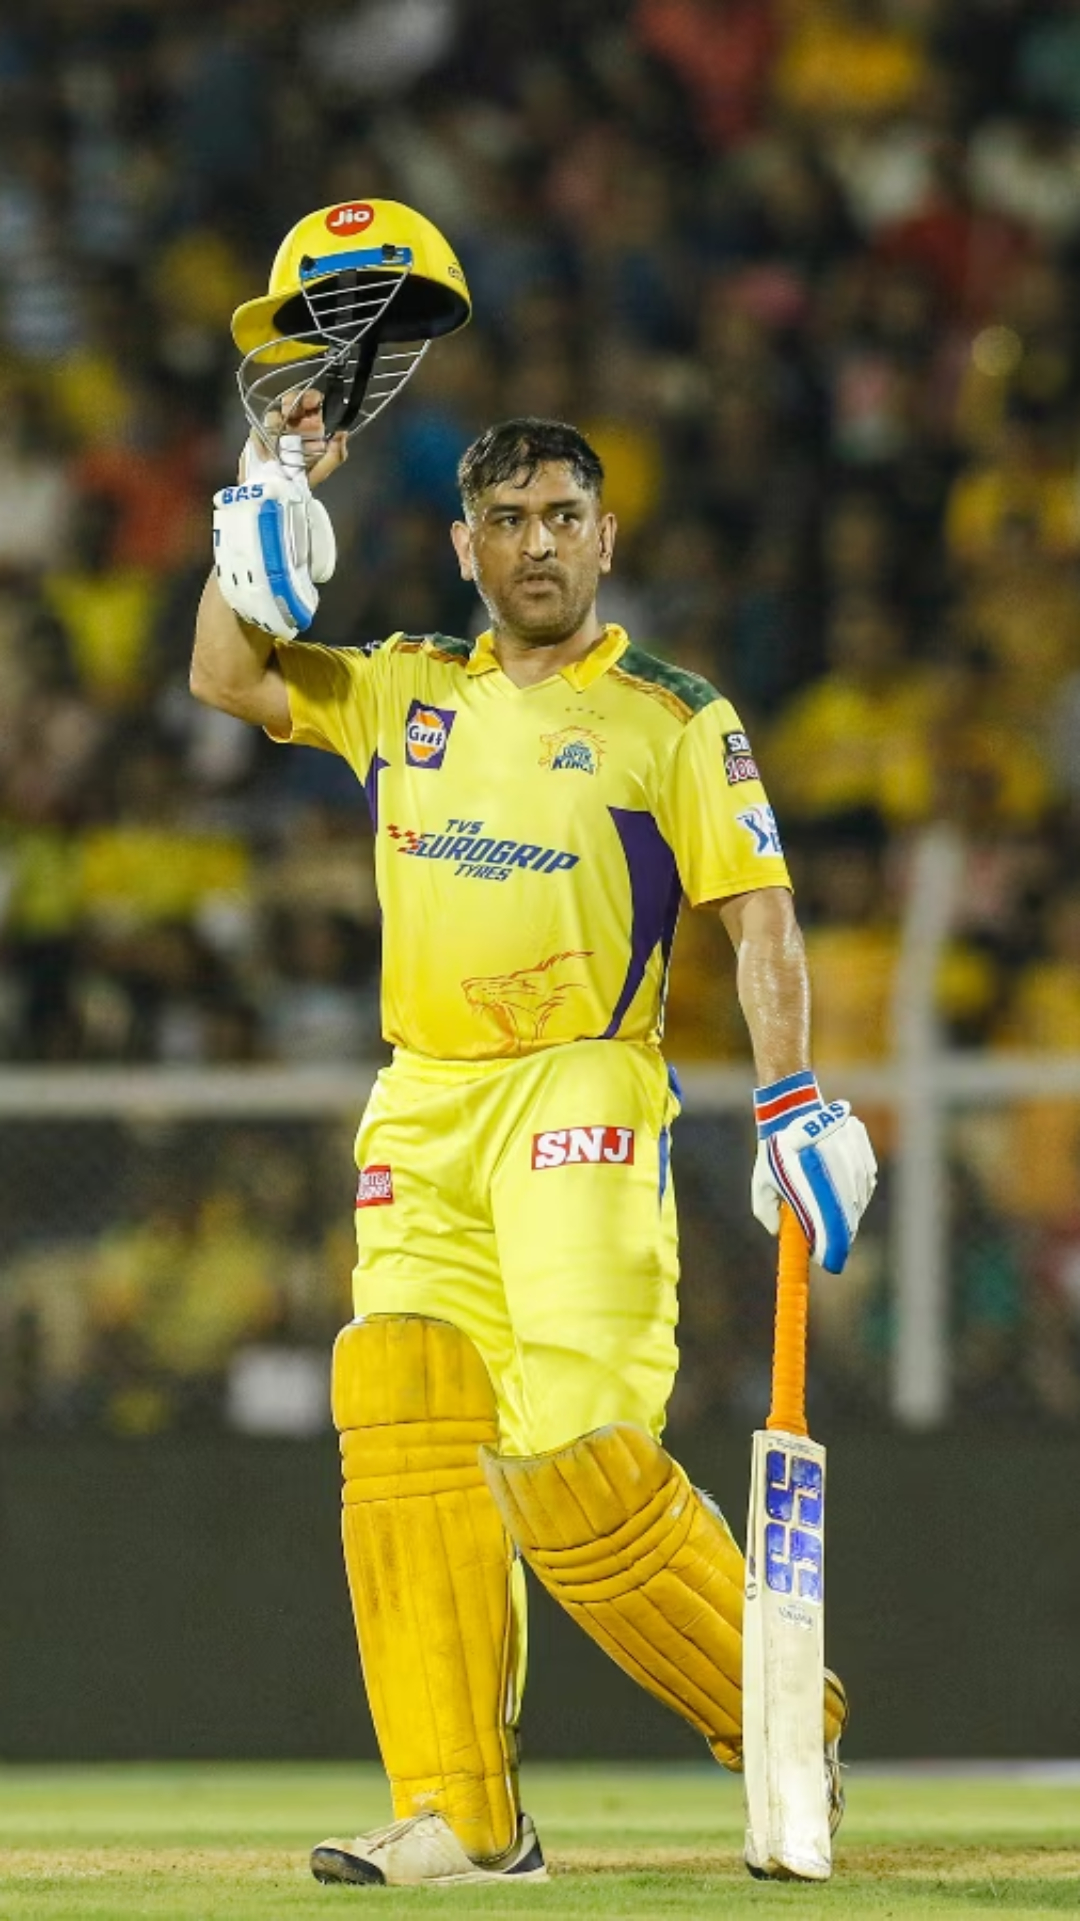 Most Player of the match awards for each team in IPL, feat MS Dhoni, AB de Villiers